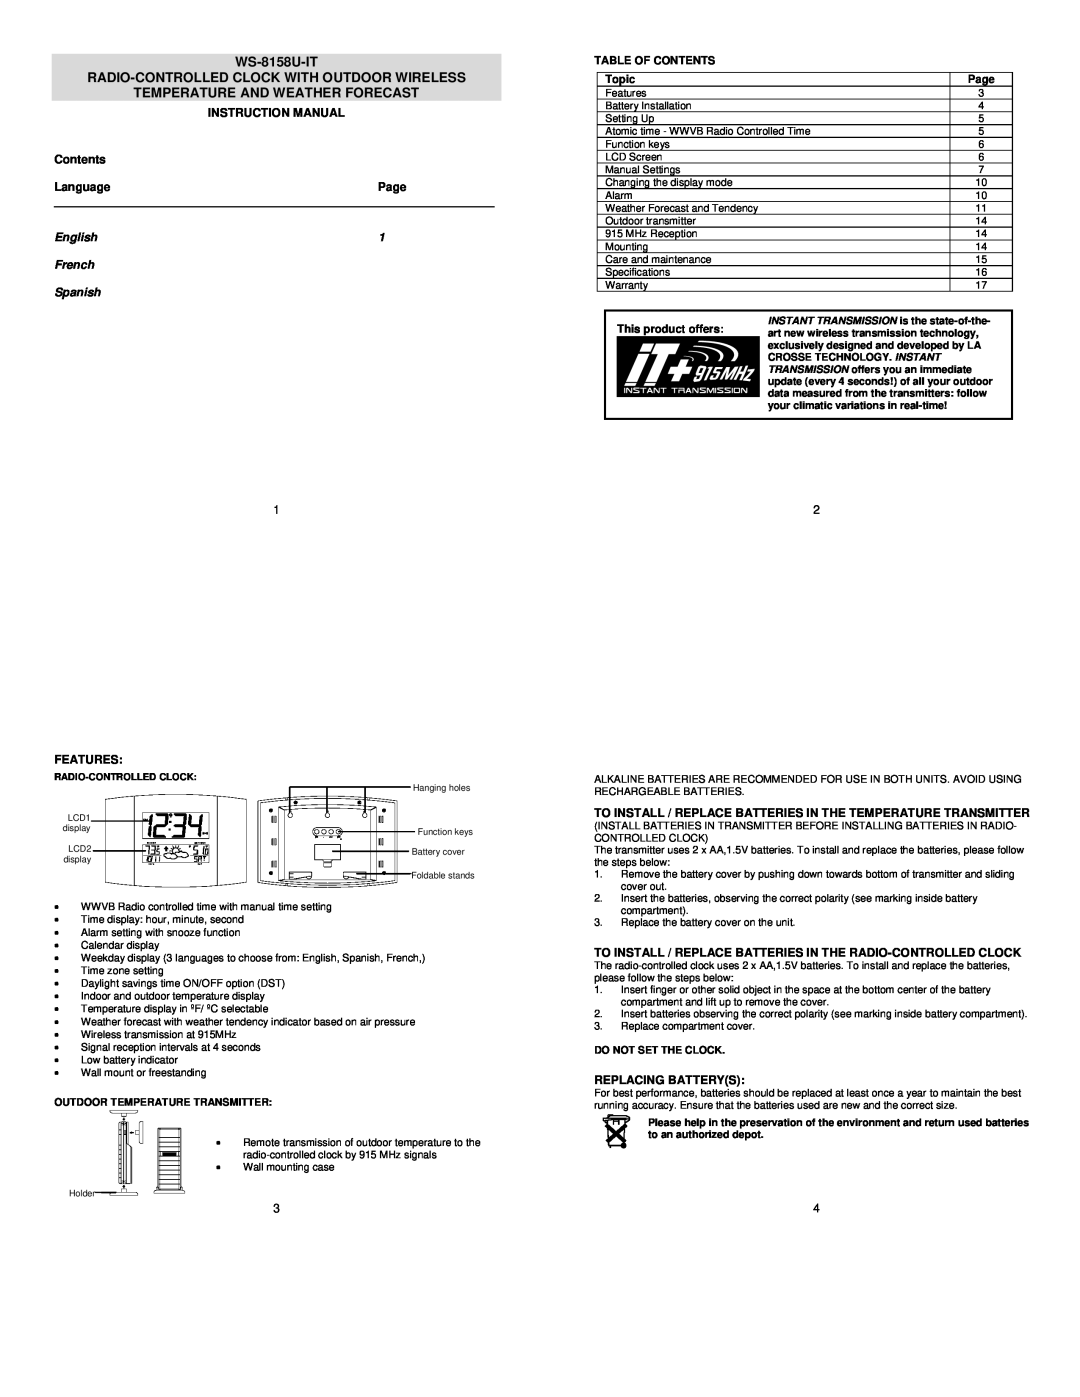 La Crosse Technology WS-8158U-IT instruction manual Instruction Manual, Language, Table Of Contents, Topic, Page 